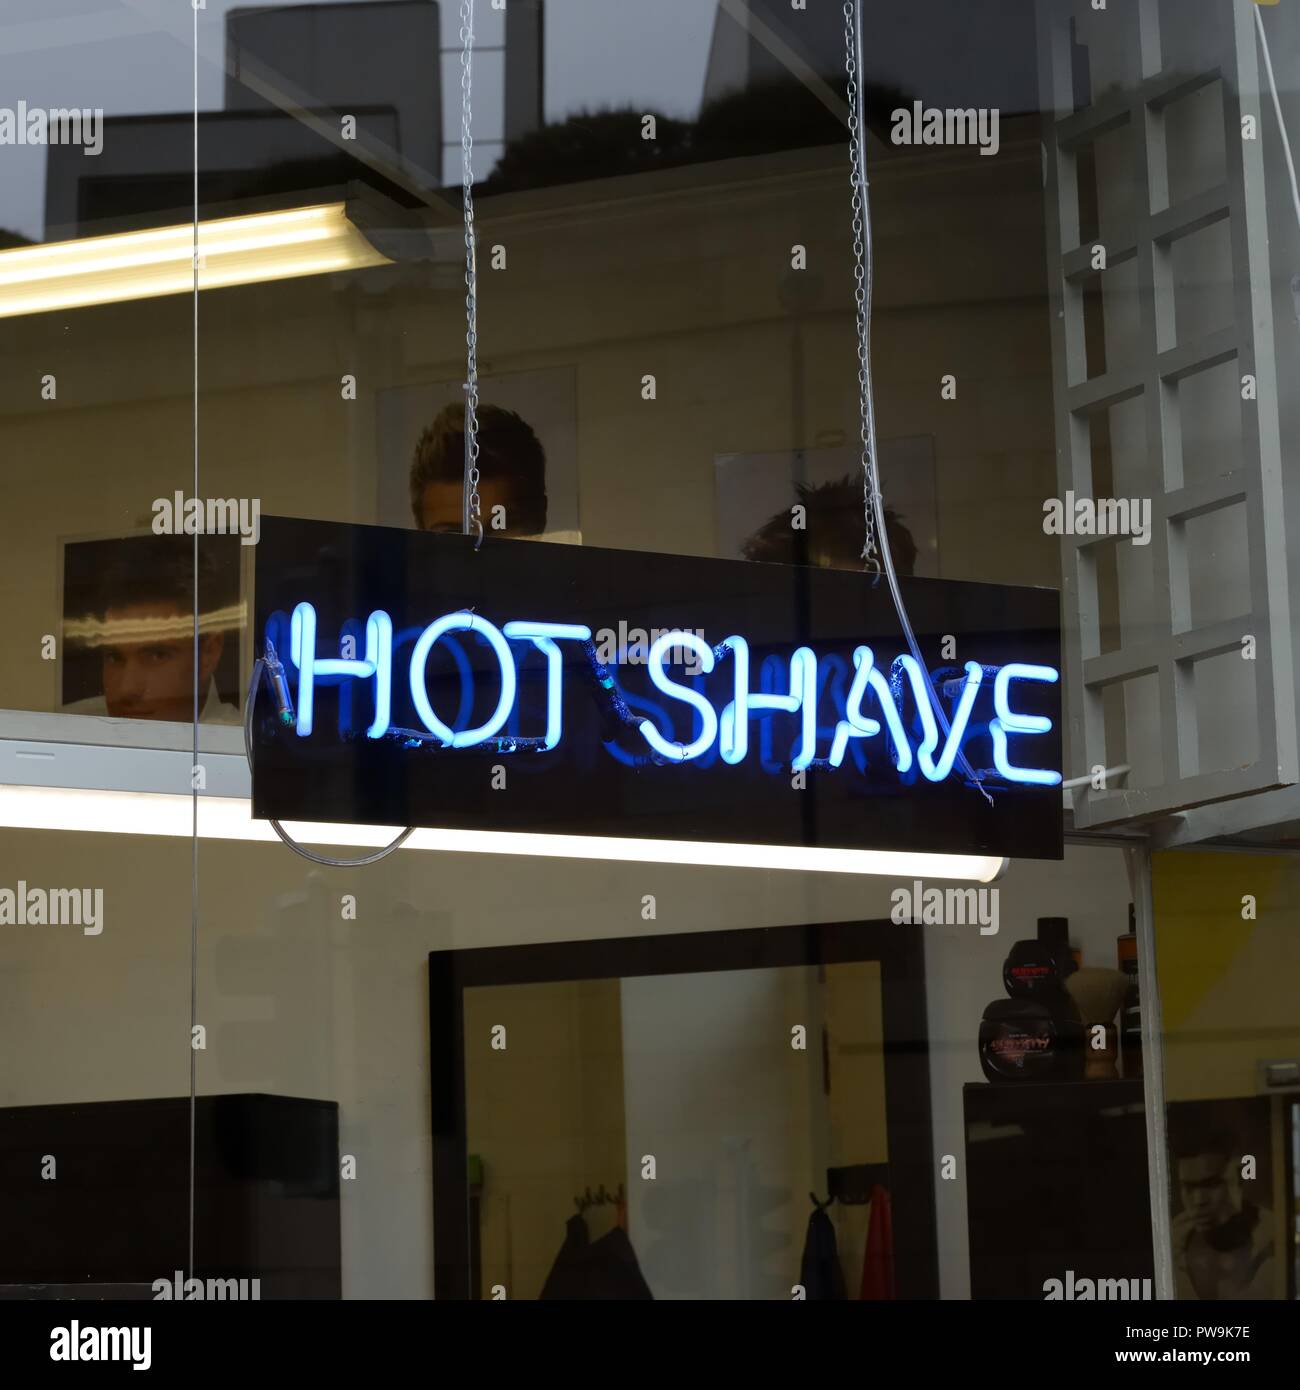 A neon tube sign in a barber shop window advertising a 'Hot Shave' in the UK, Europe Stock Photo